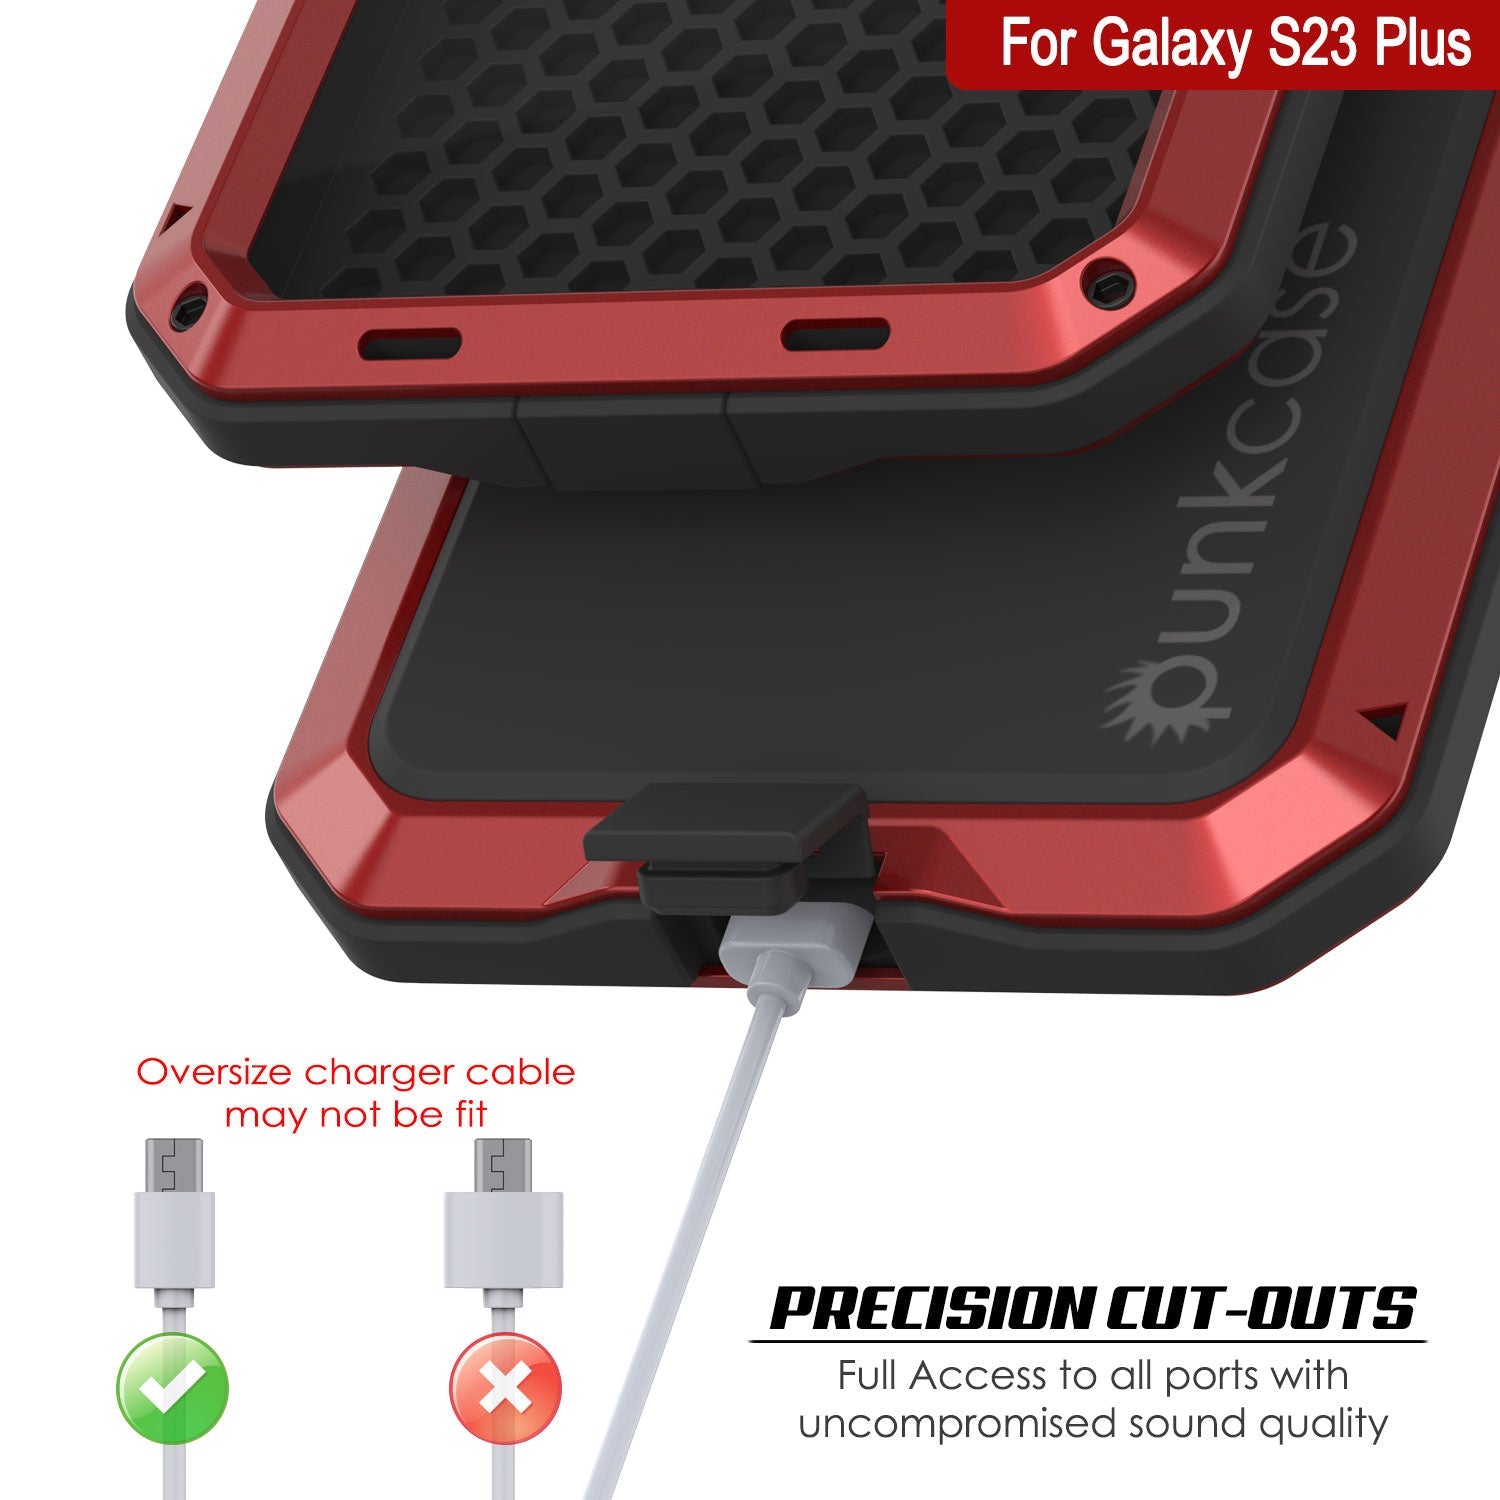 Galaxy S23+ Plus Metal Case, Heavy Duty Military Grade Armor Cover [shock proof] Full Body Hard [Red]